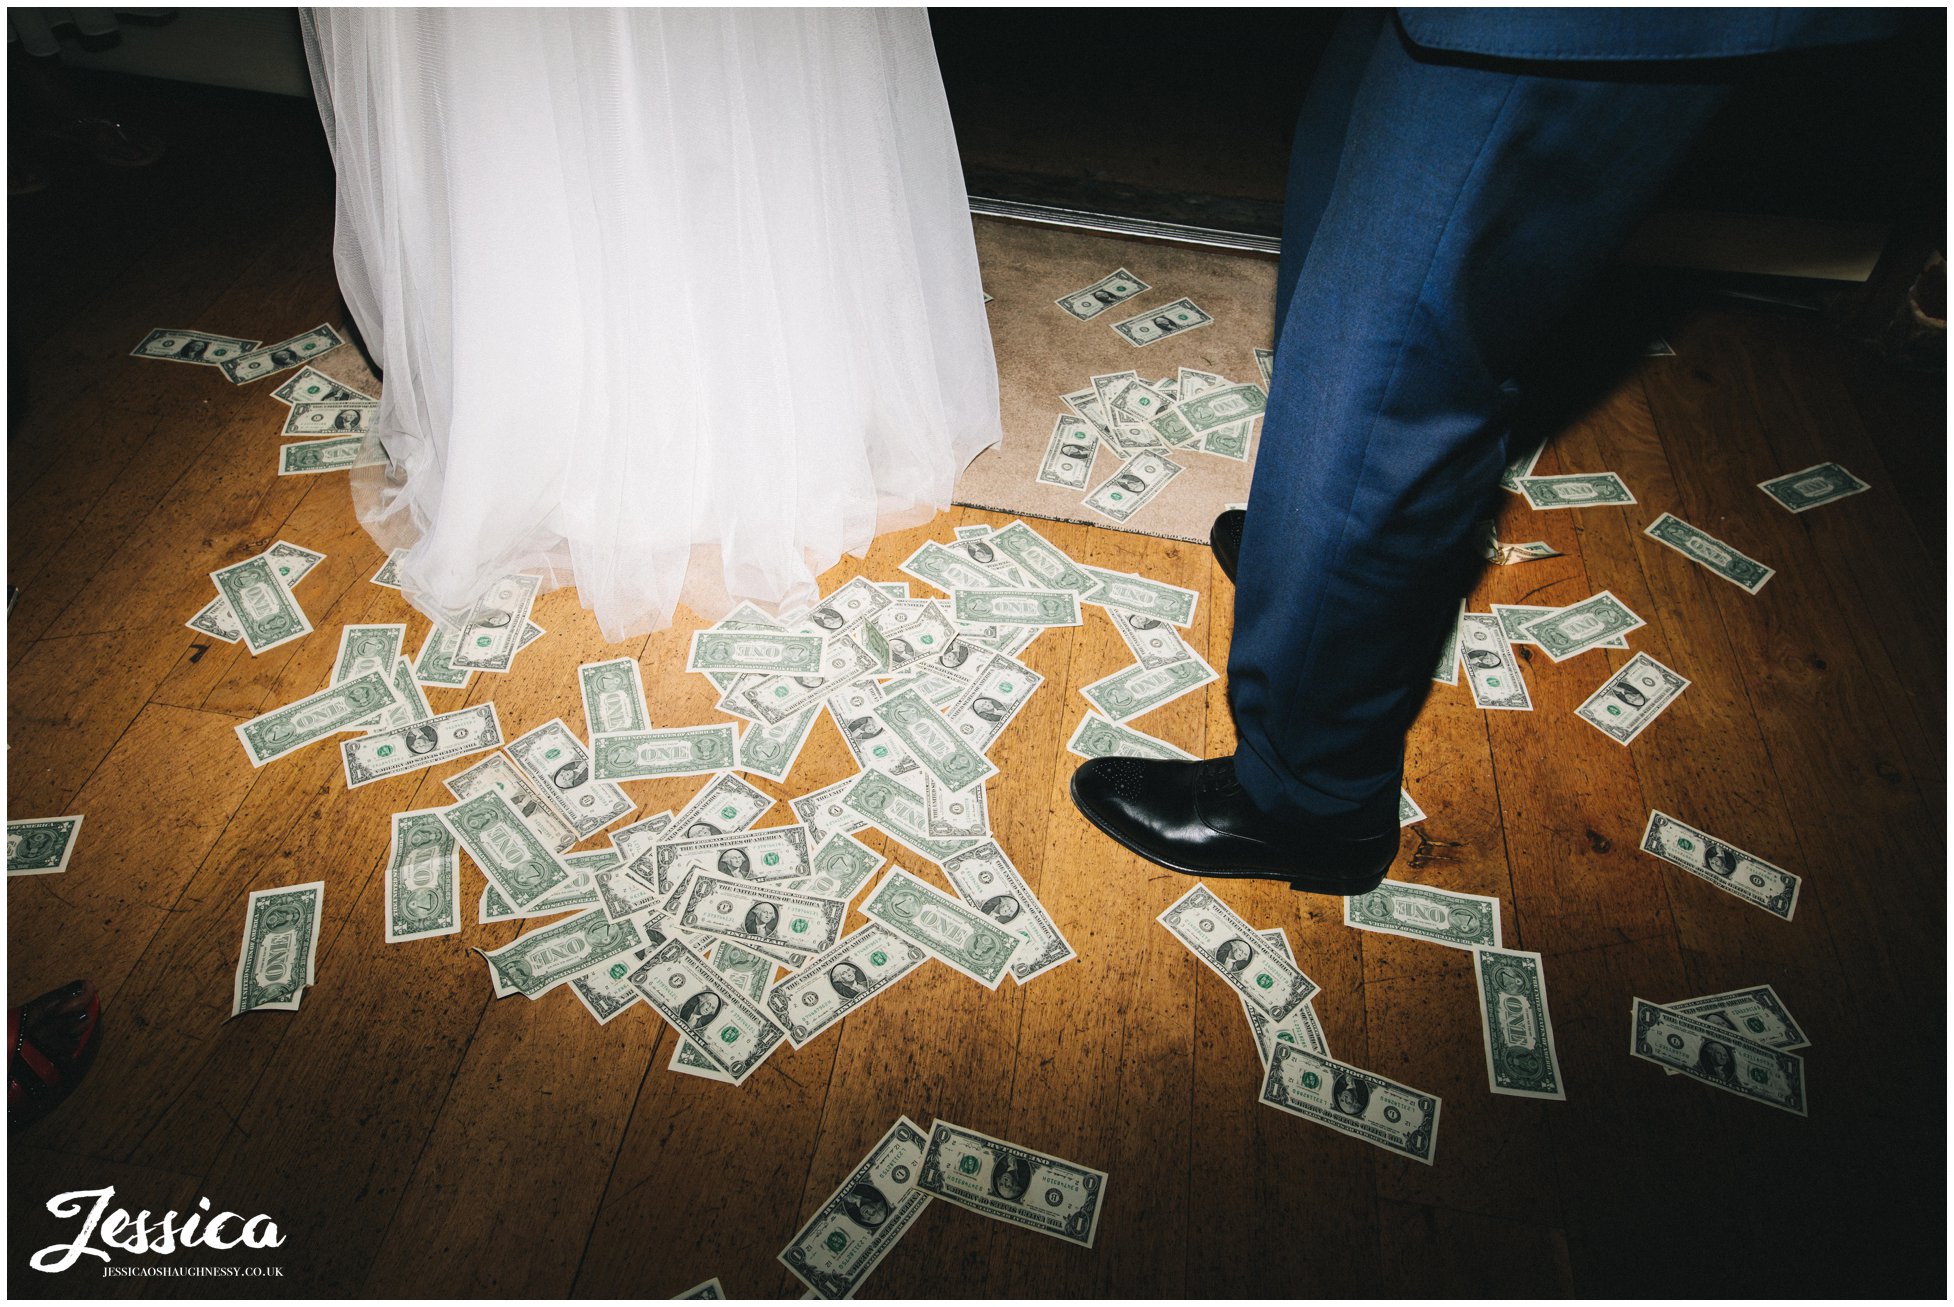 dollars cover the floor in a nigerian wedding tradition